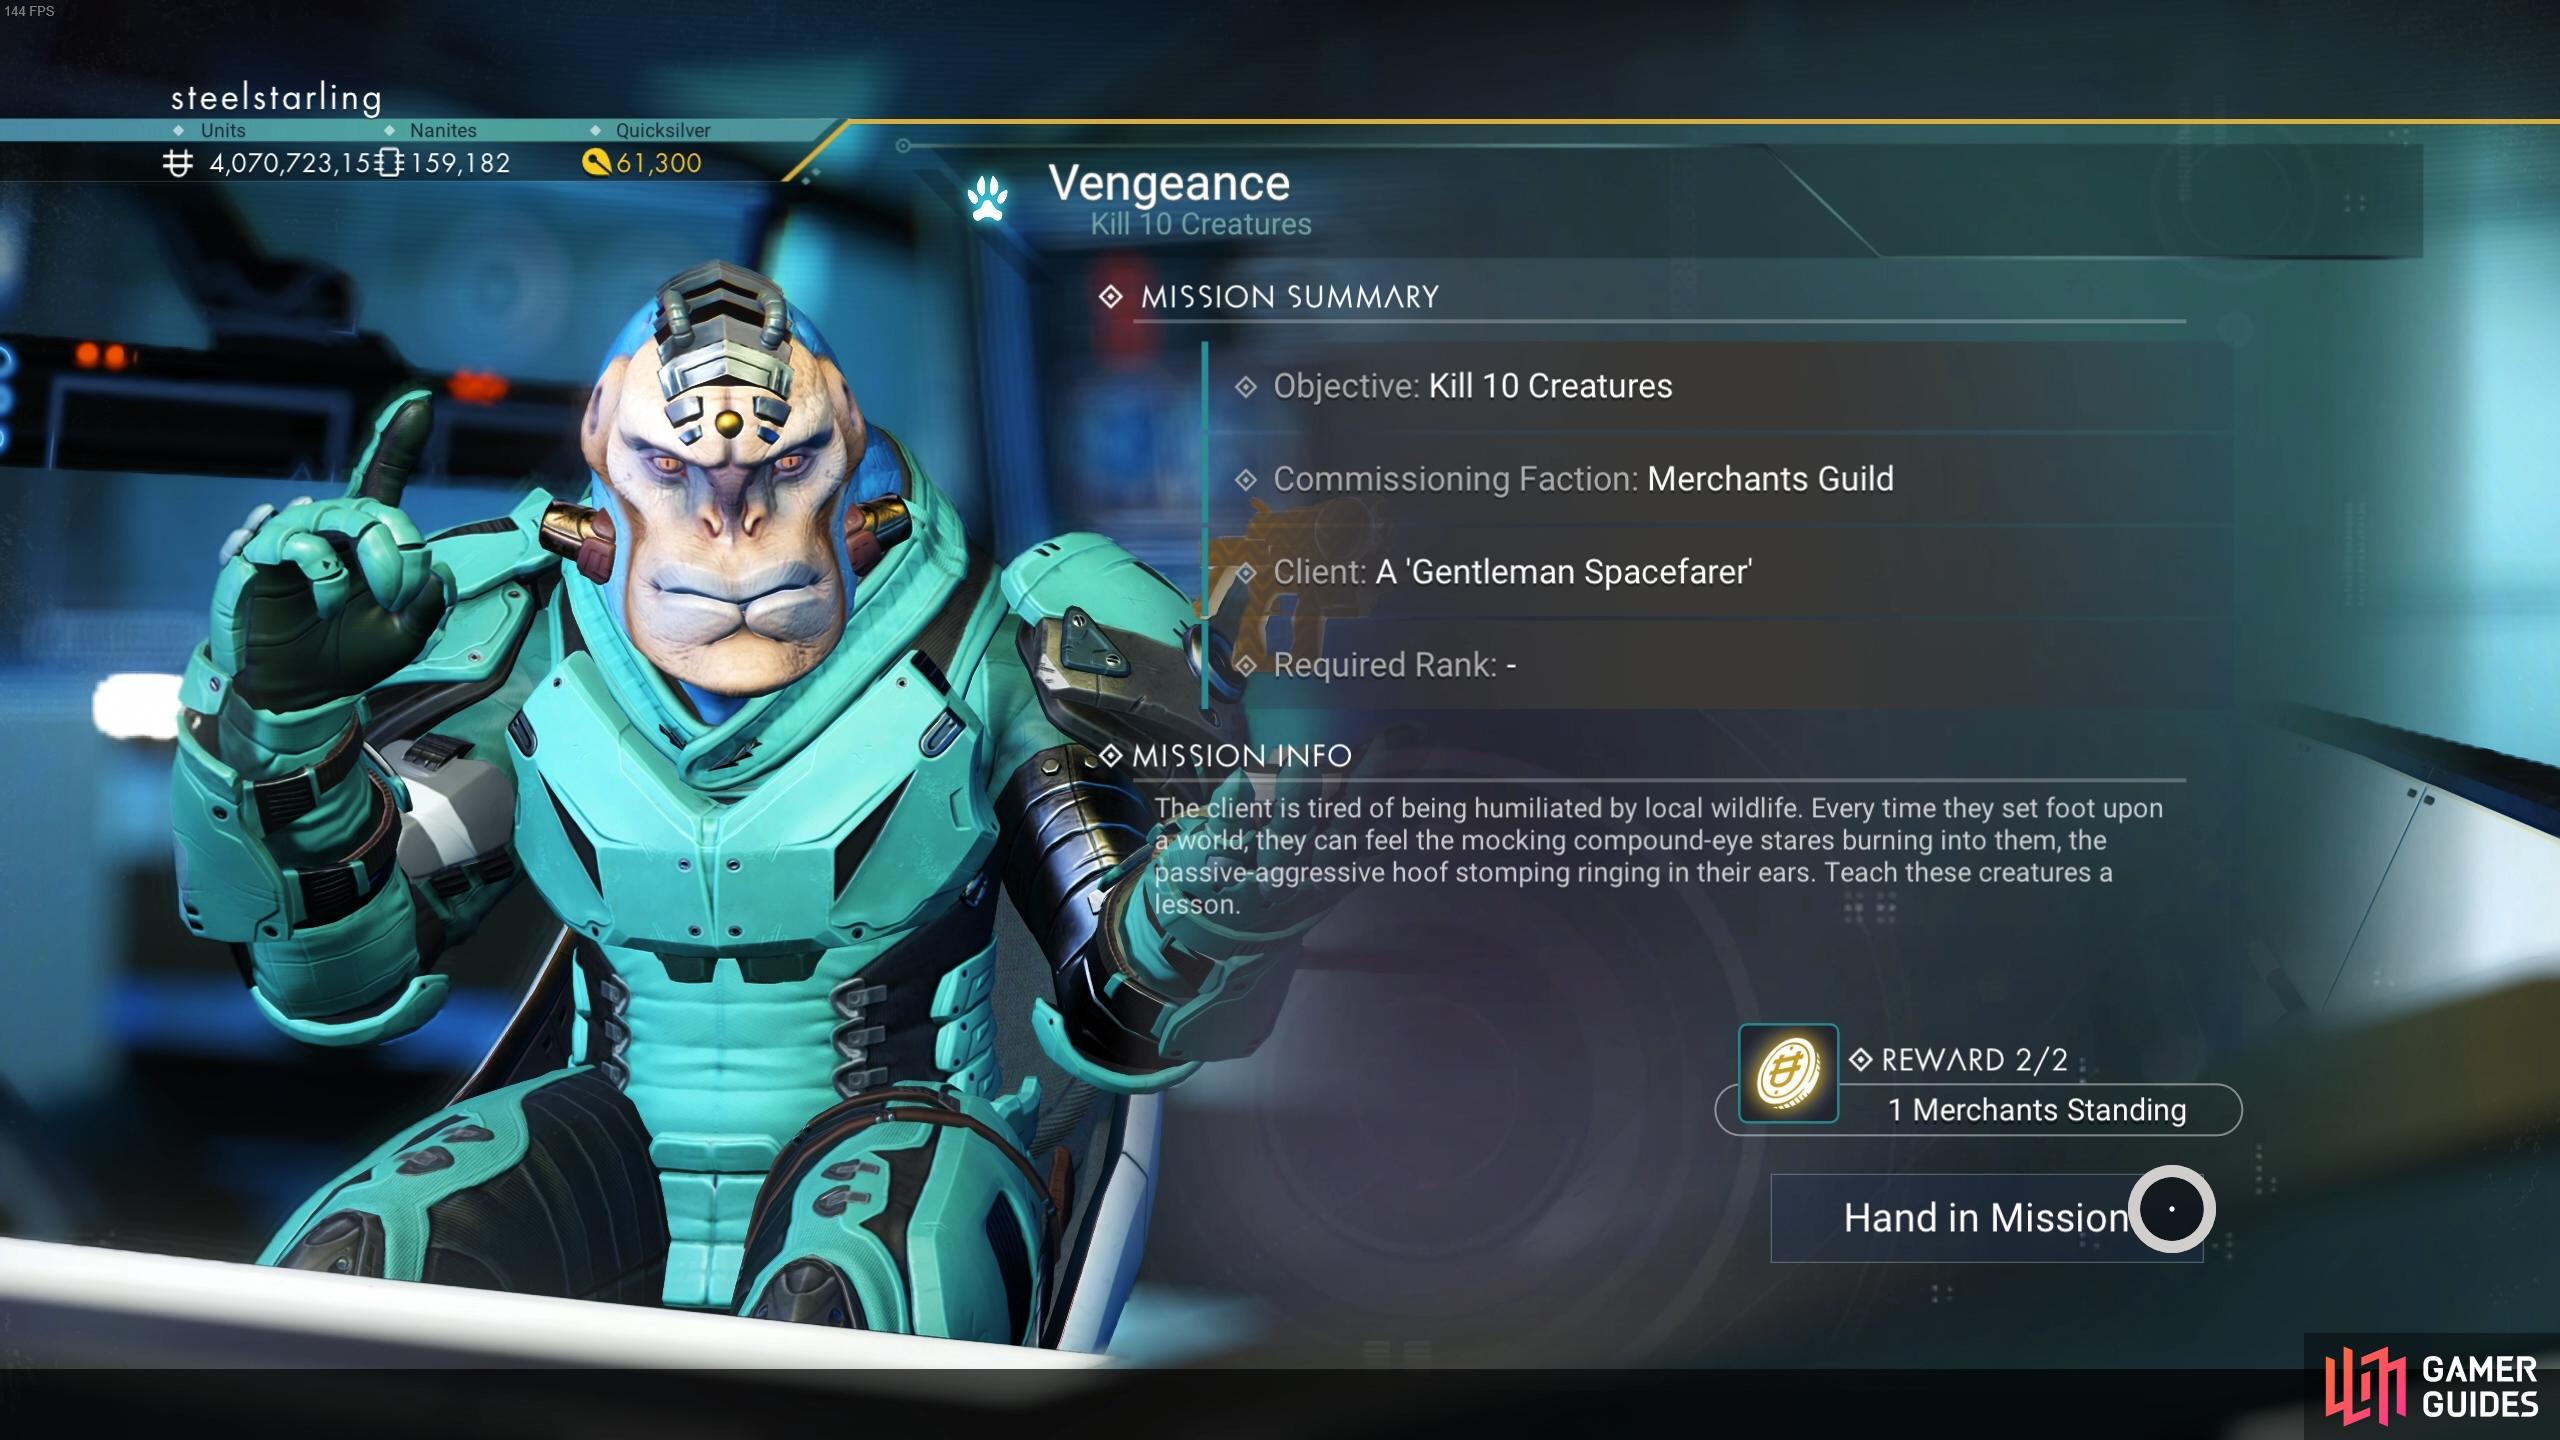 You can view the rewards for each mission, alongside the objective, client, and guild.